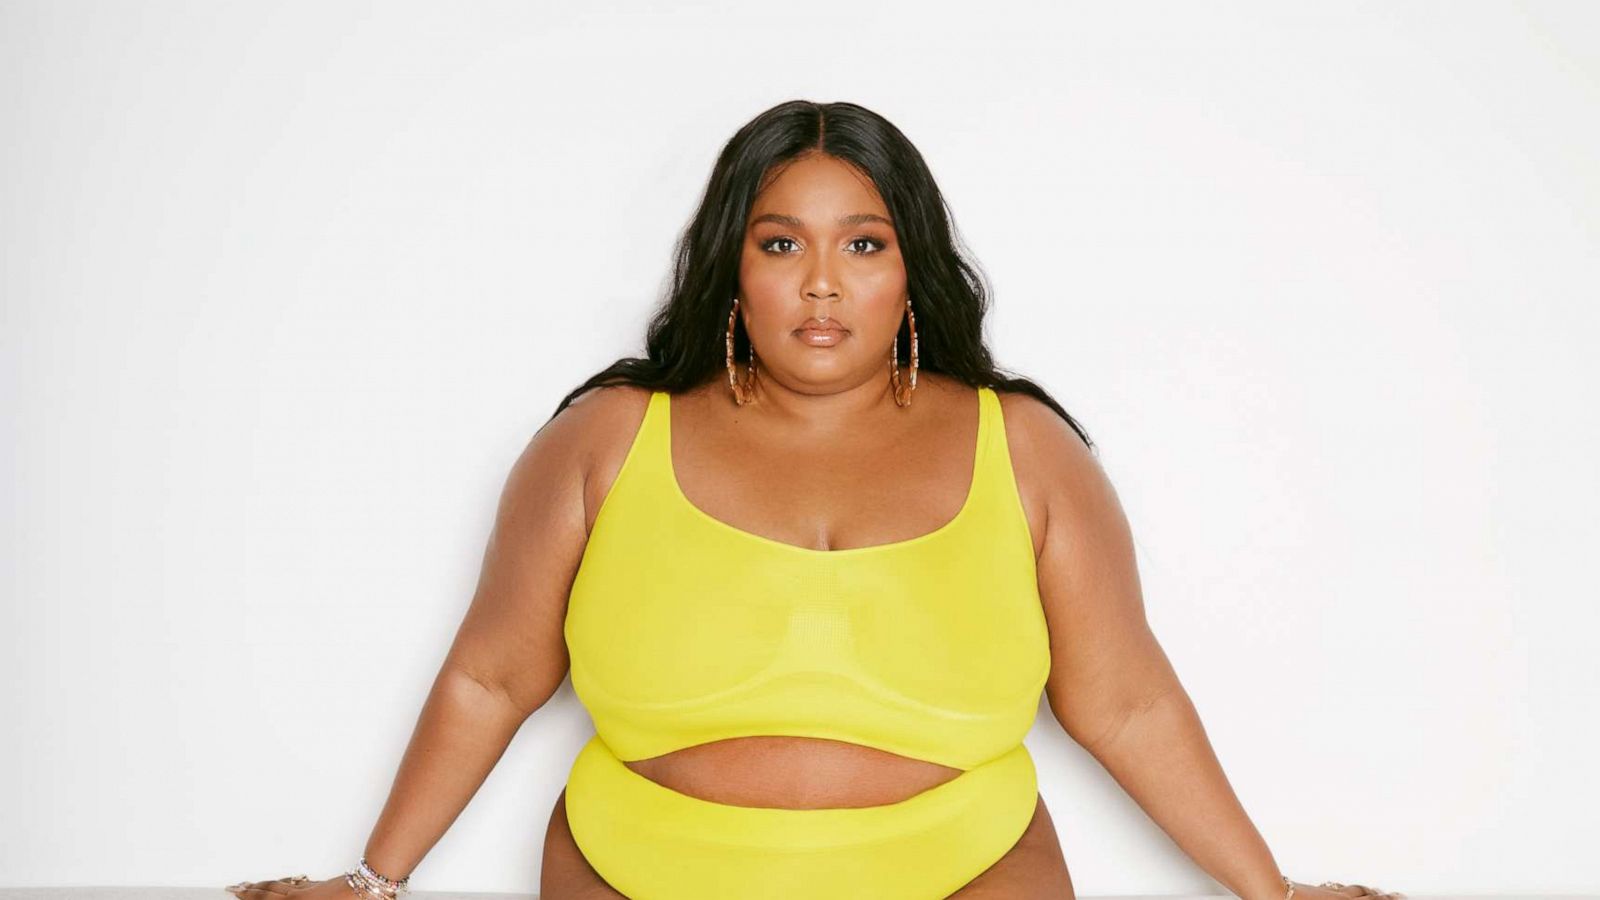 Lizzo launches Yitty, a new body-positive shapewear line - ABC News